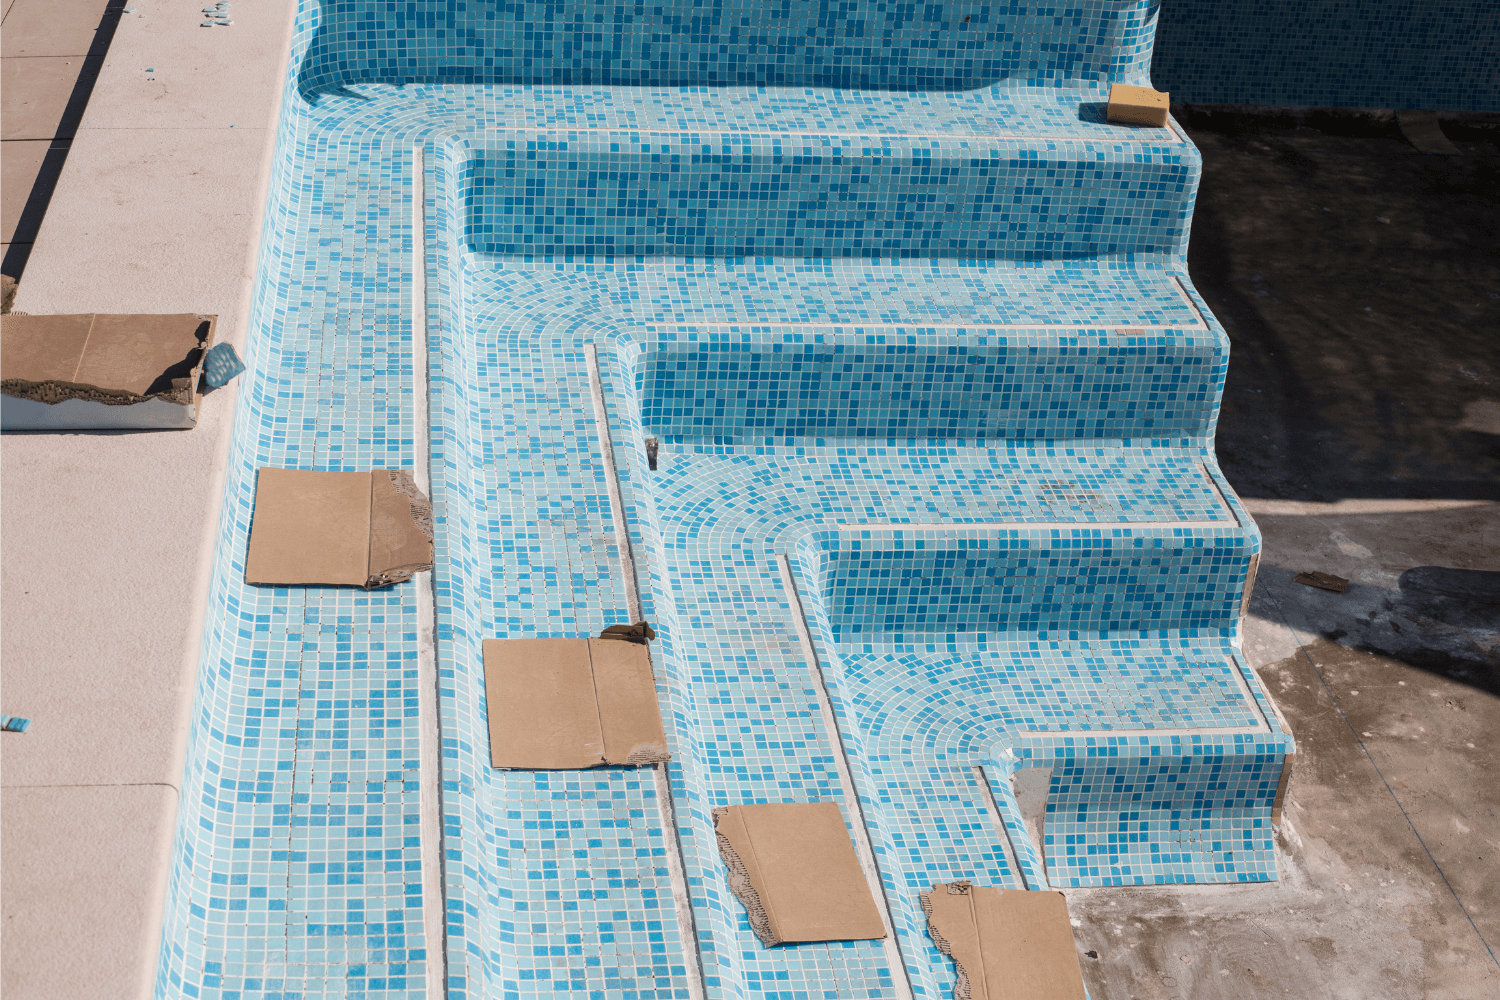 Residential swimming pool steps getting new tiles installed